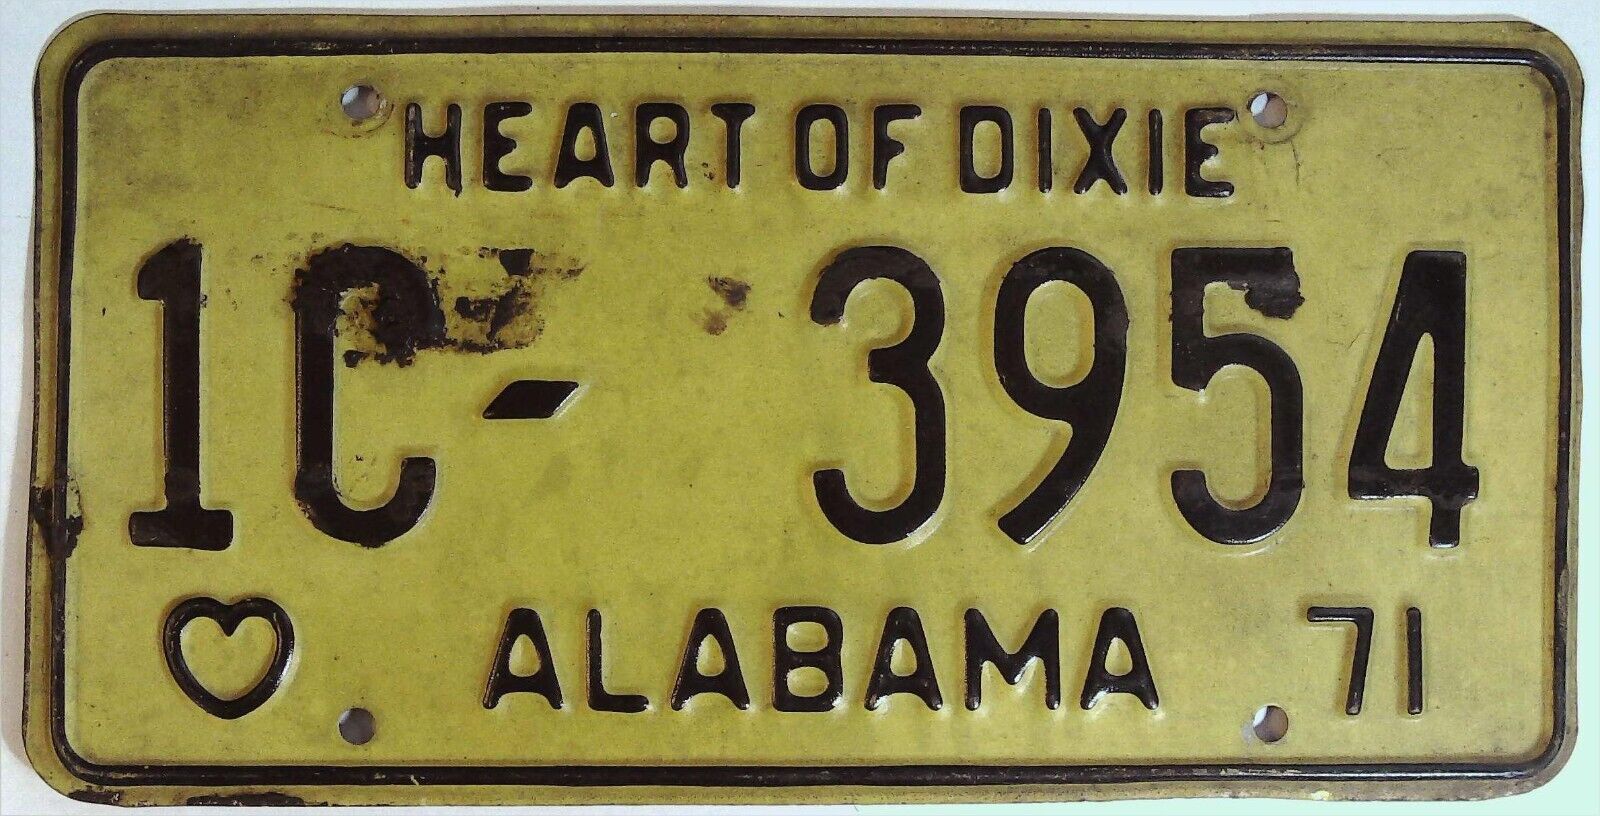 Alabama Al License Plate Tag Vintage 1971 County 1 # 1c-3954 Heart Of Dixie A2